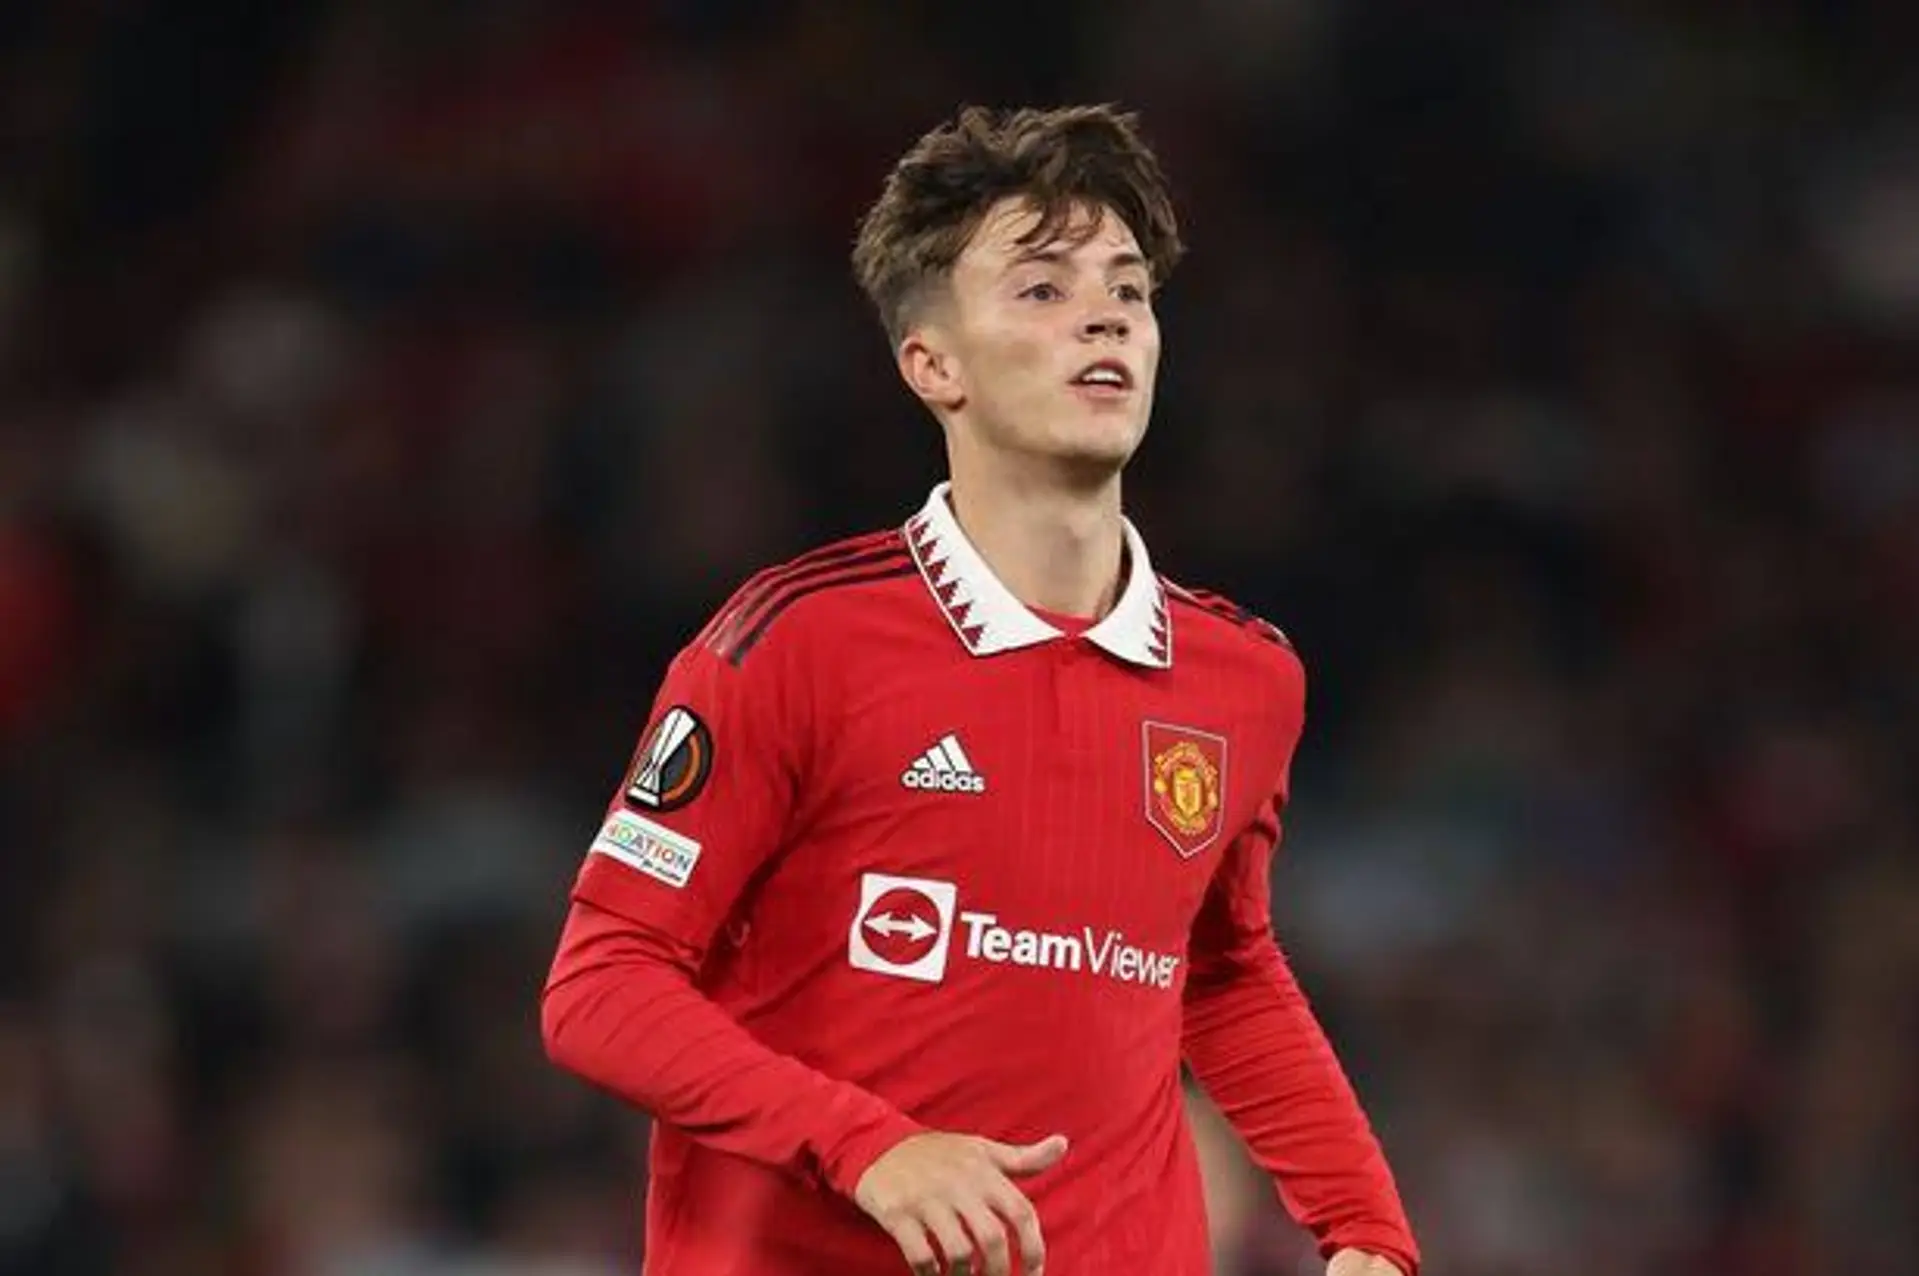 Charlie McNeill’s path to the Manchester United first team